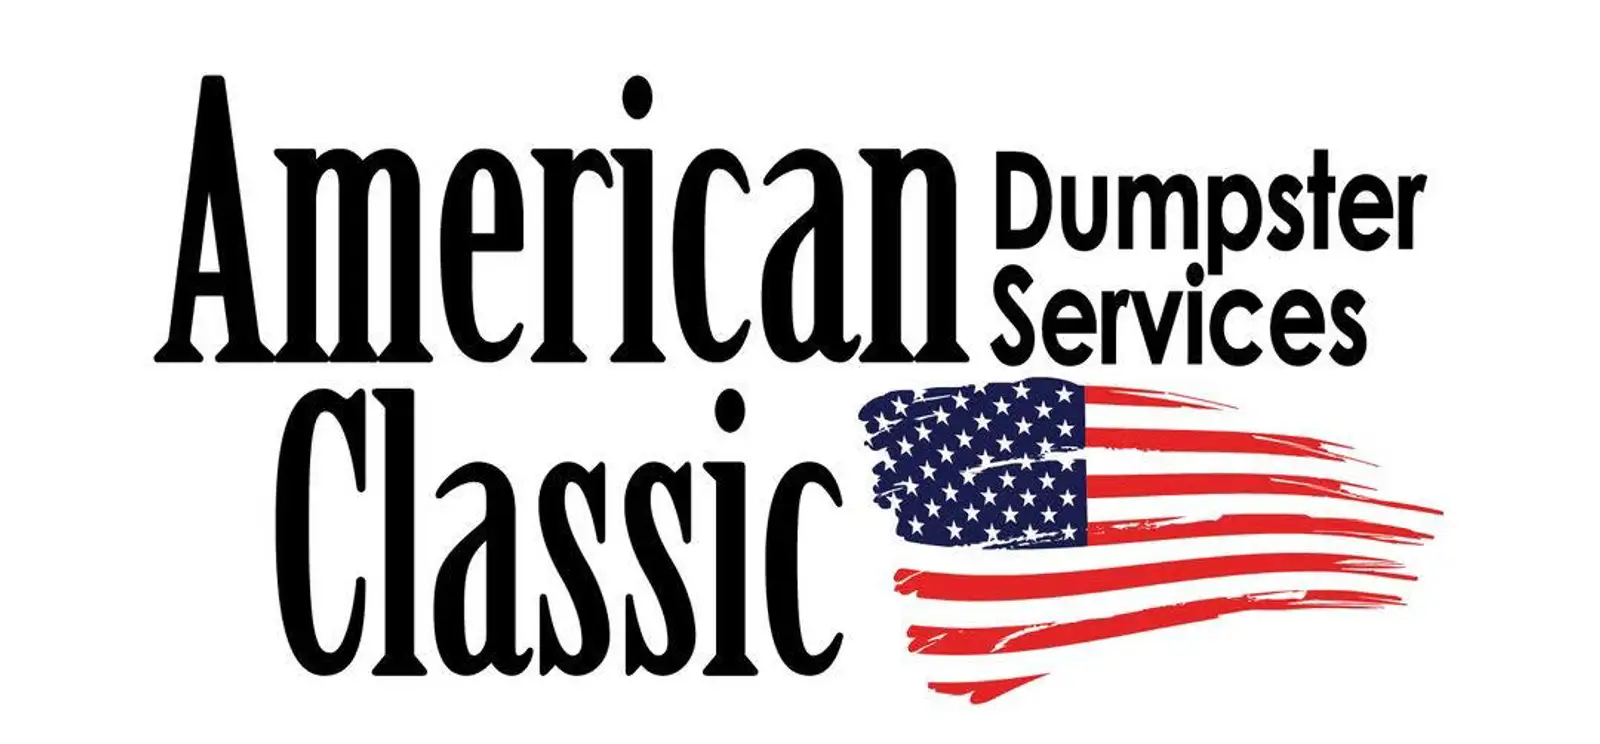 American Classic Dumpster Services logo